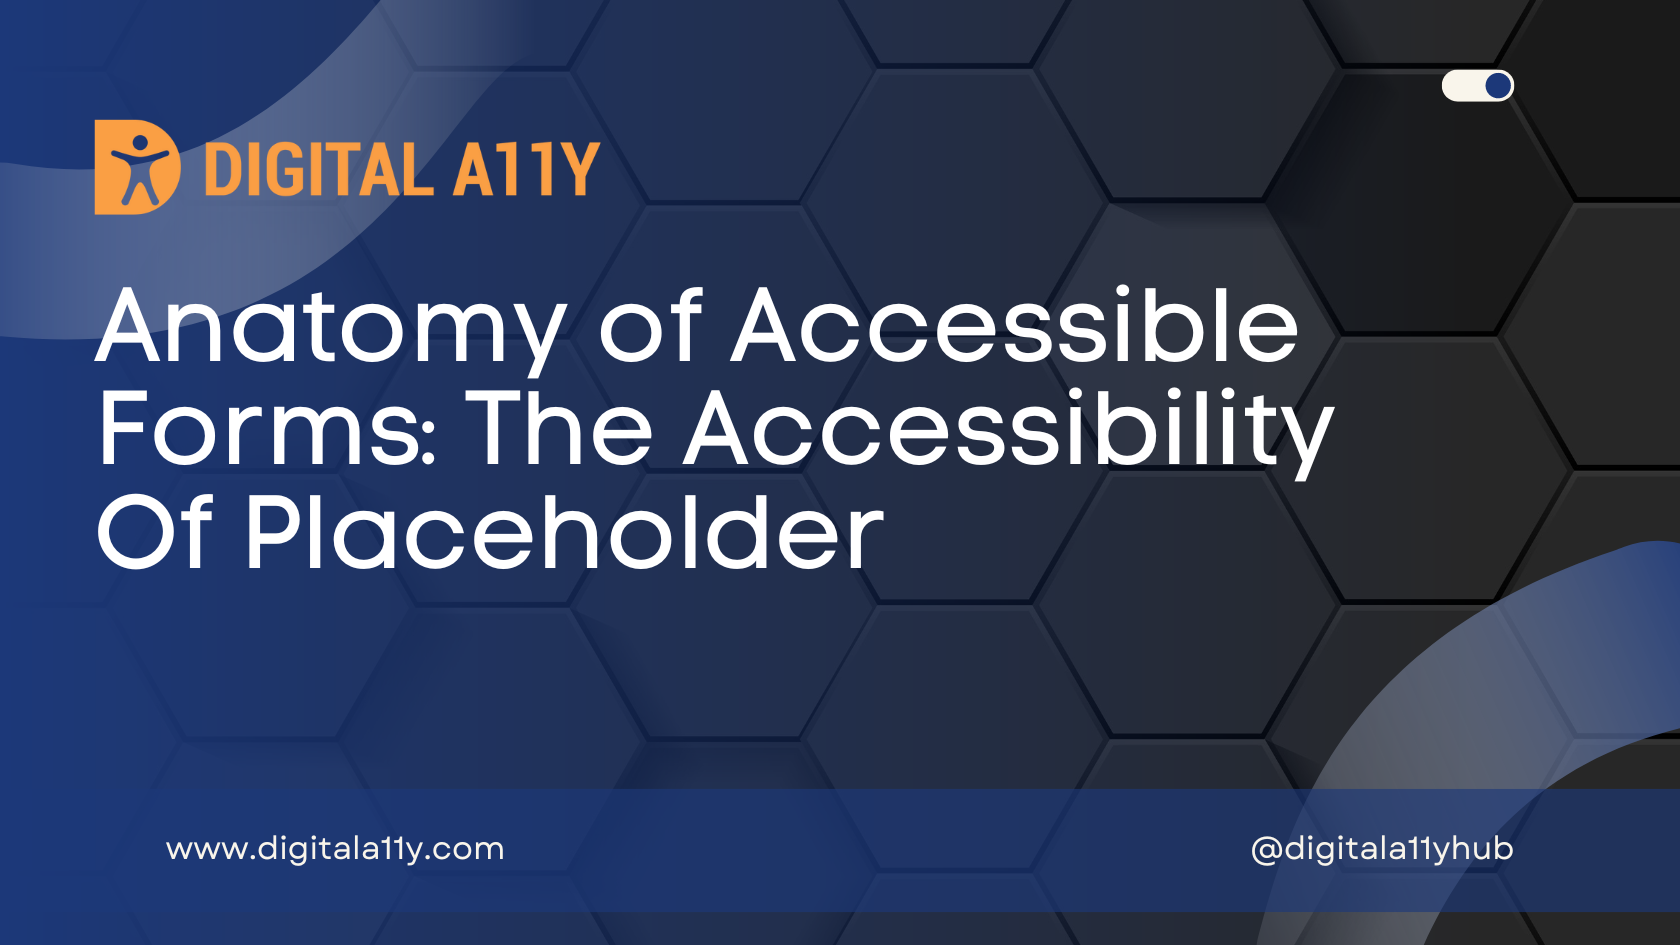 Anatomy of Accessible Forms: The Accessibility Of Placeholder